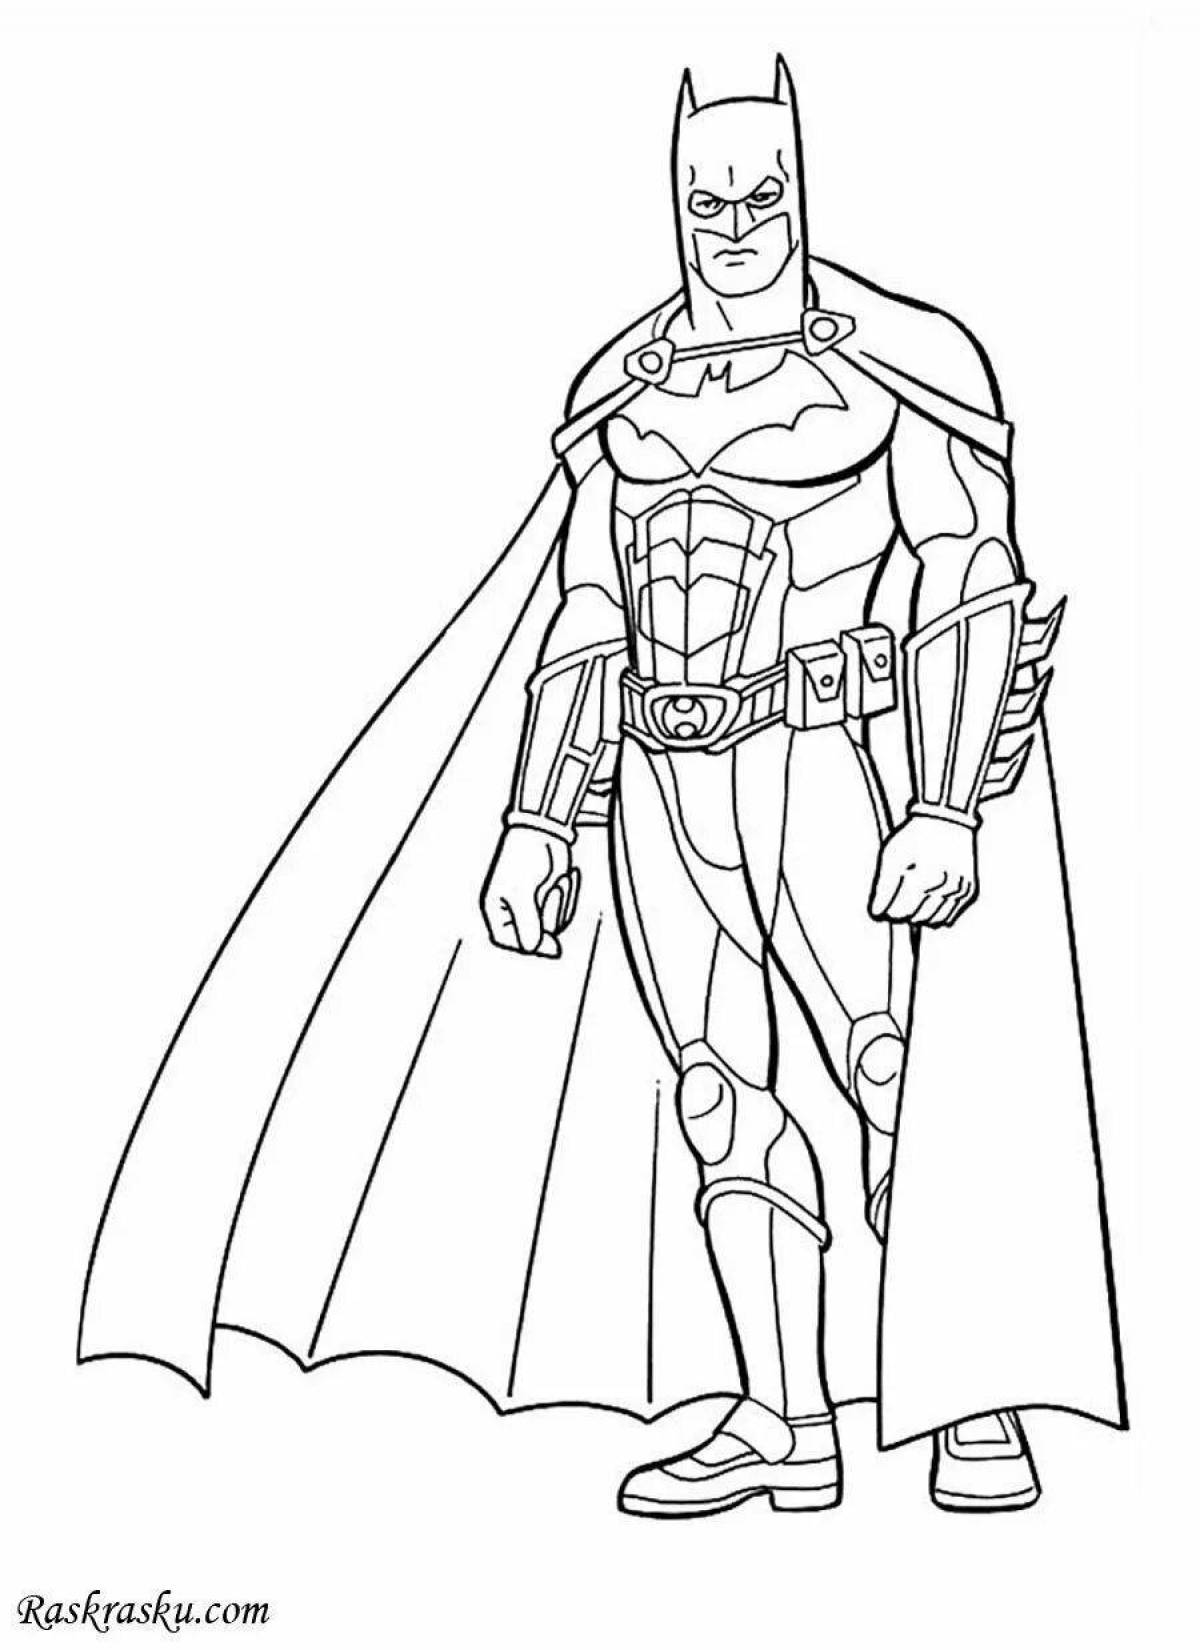 Outstanding superhero coloring page for 5 year old boys